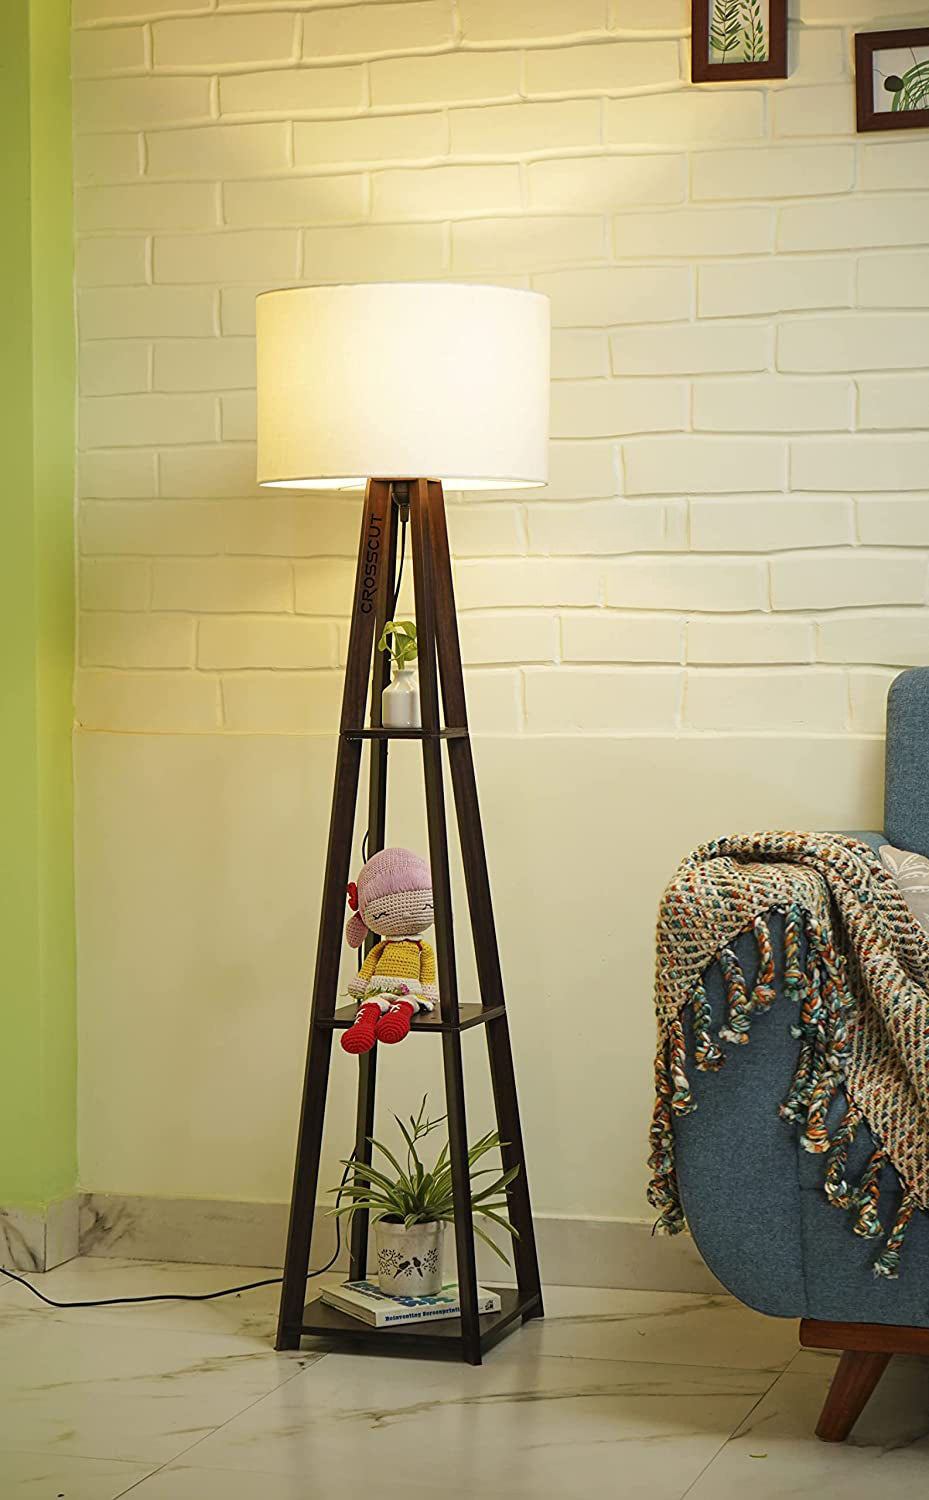 Wooden Floor Lamp with Shelf (Brown White)